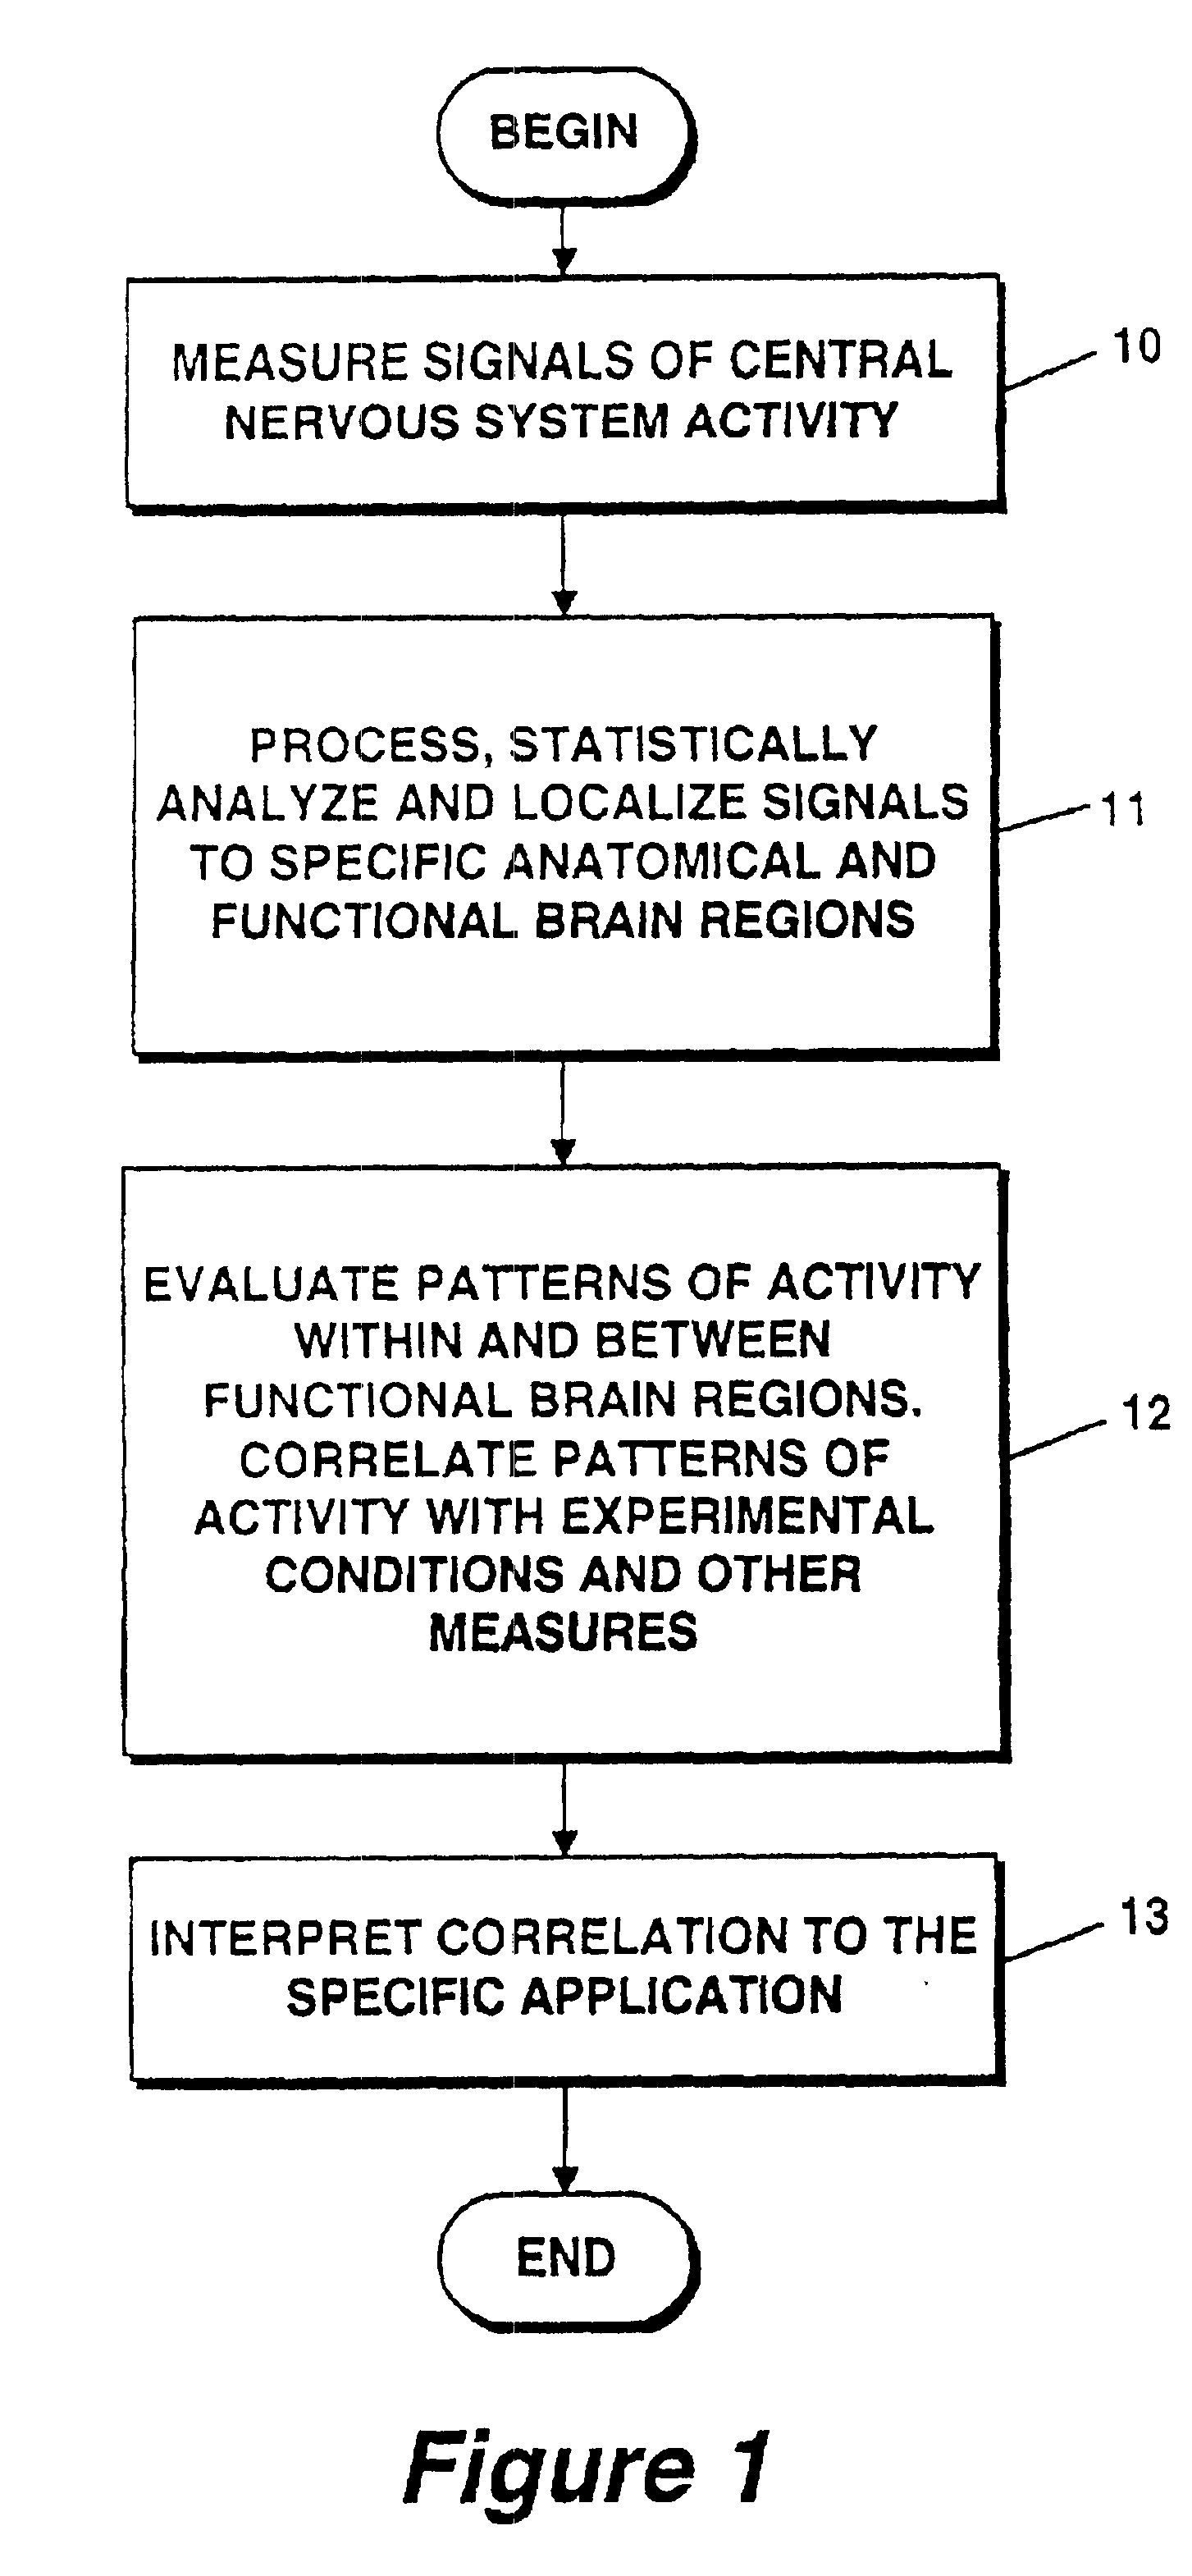 Method and apparatus for objectively measuring pain, pain treatment and other related techniques